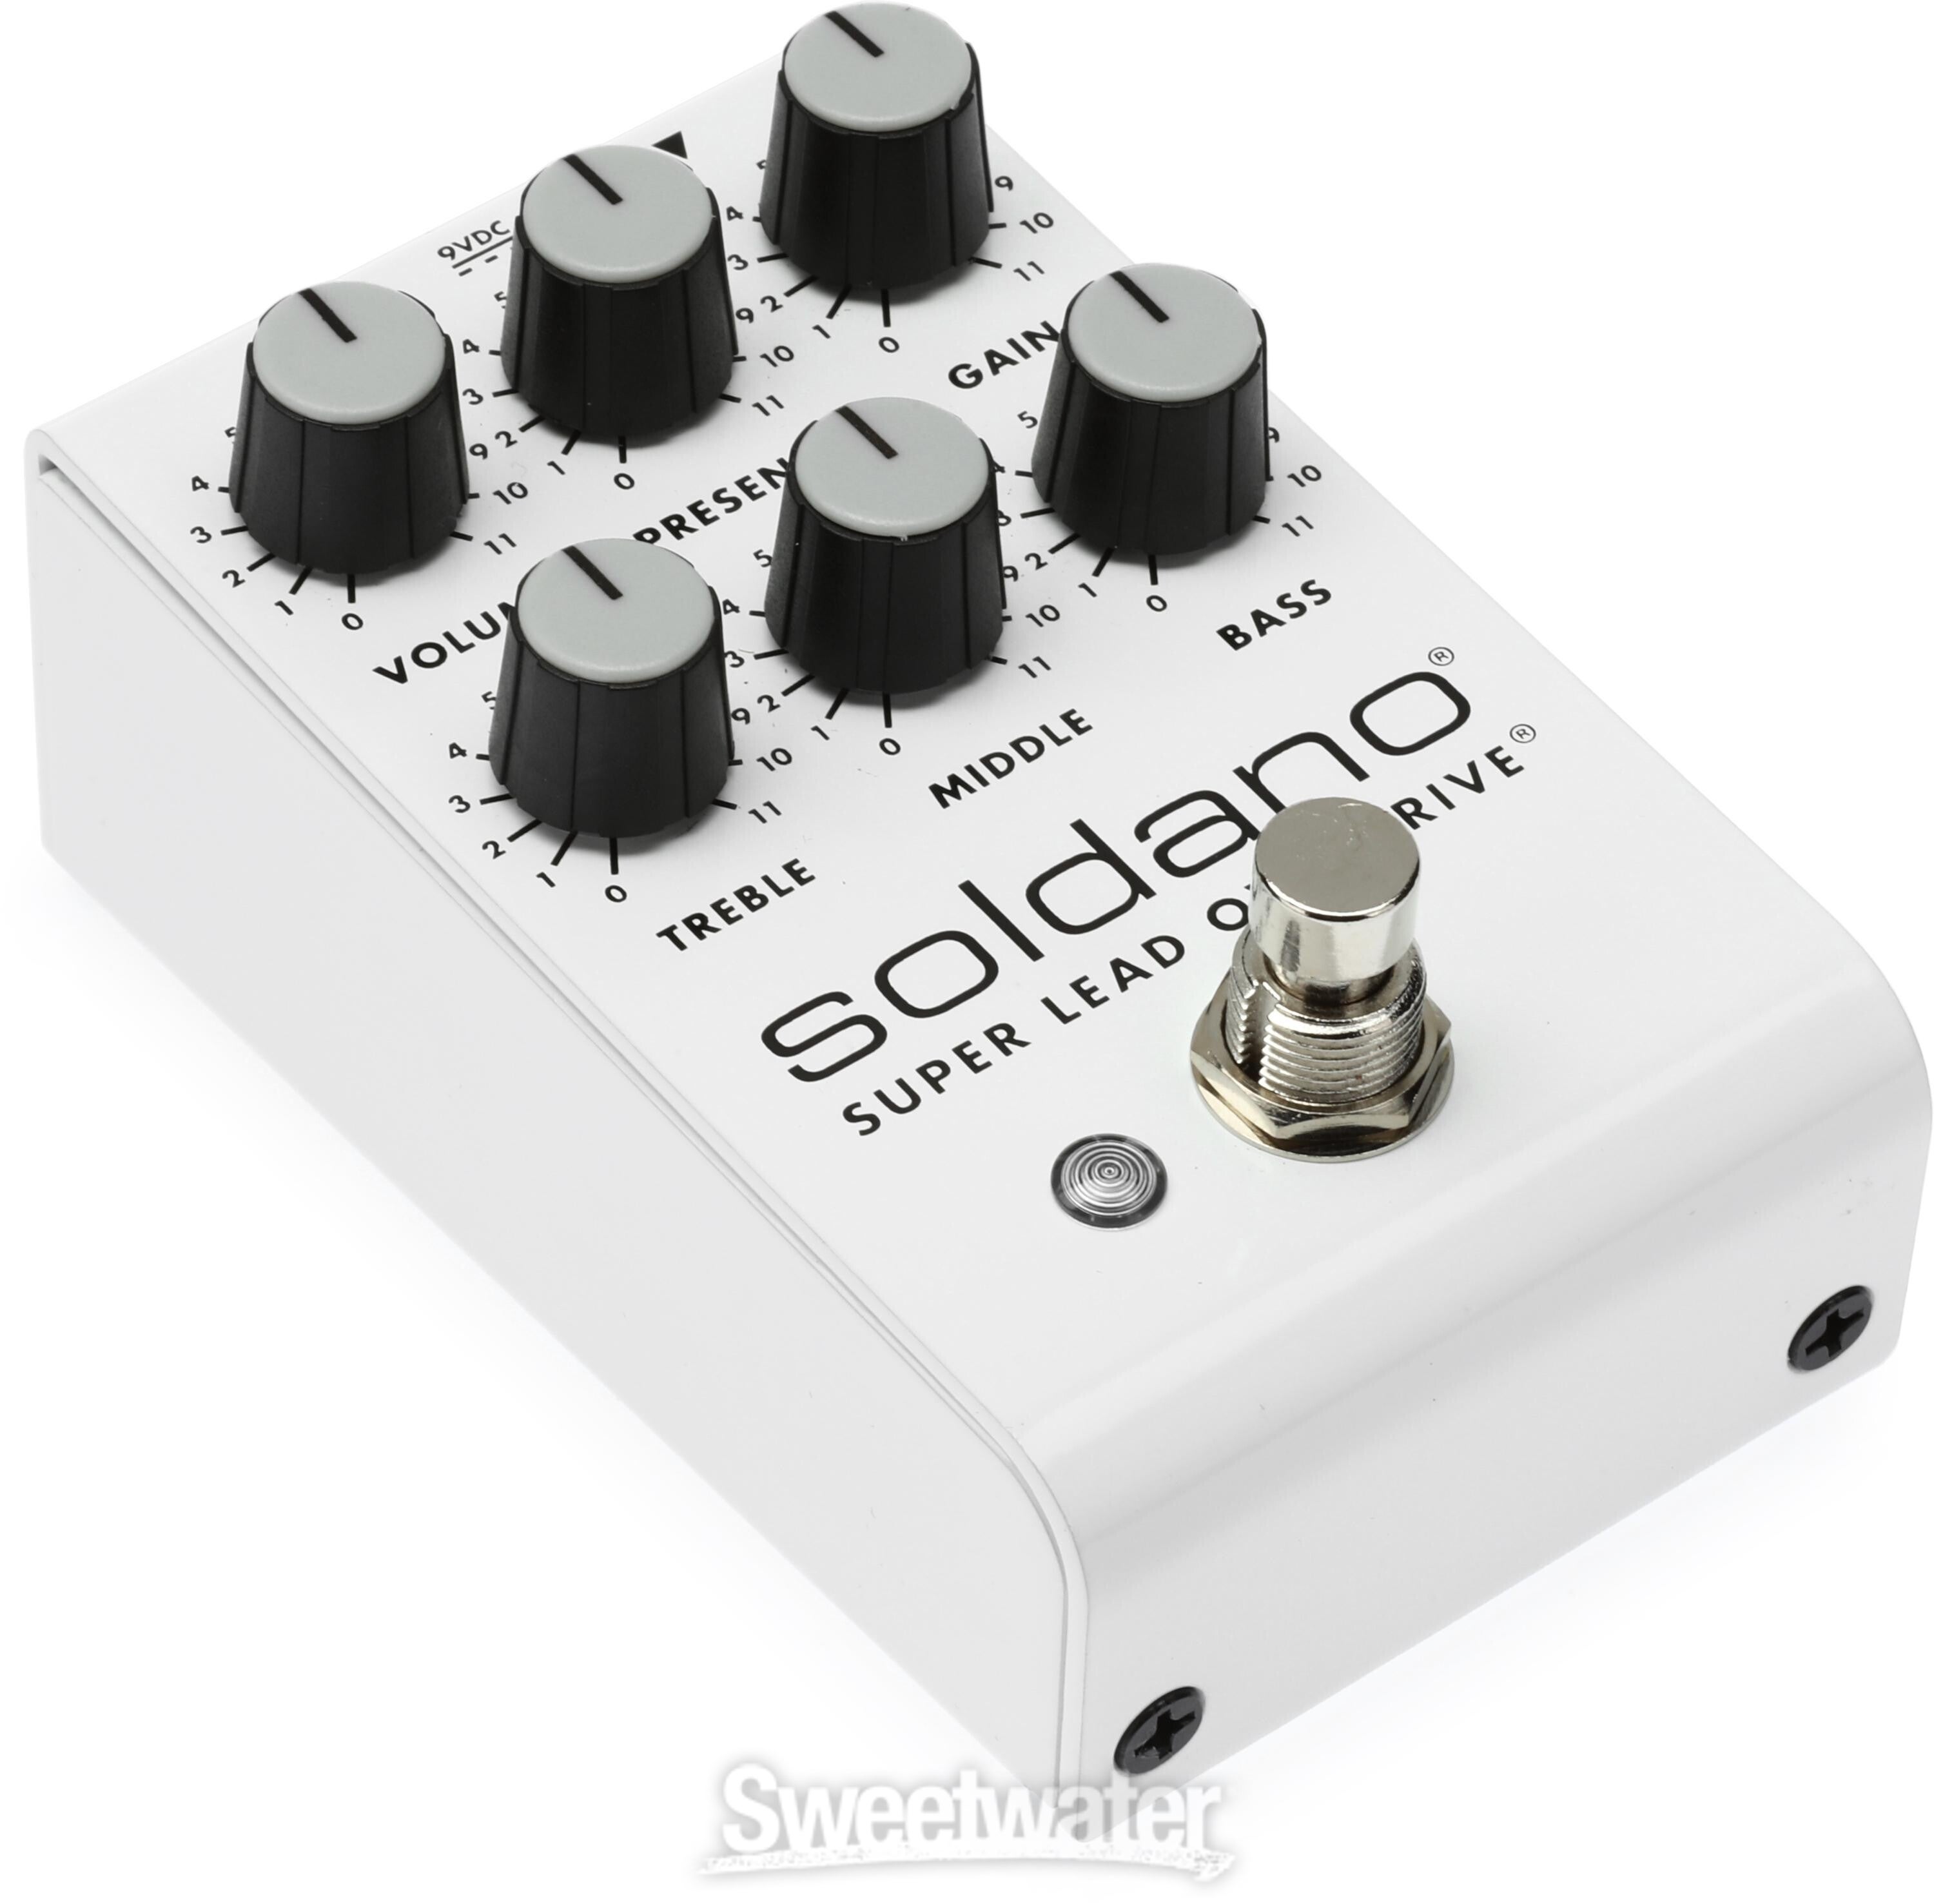 Soldano Super Lead Overdrive Pedal Reviews | Sweetwater